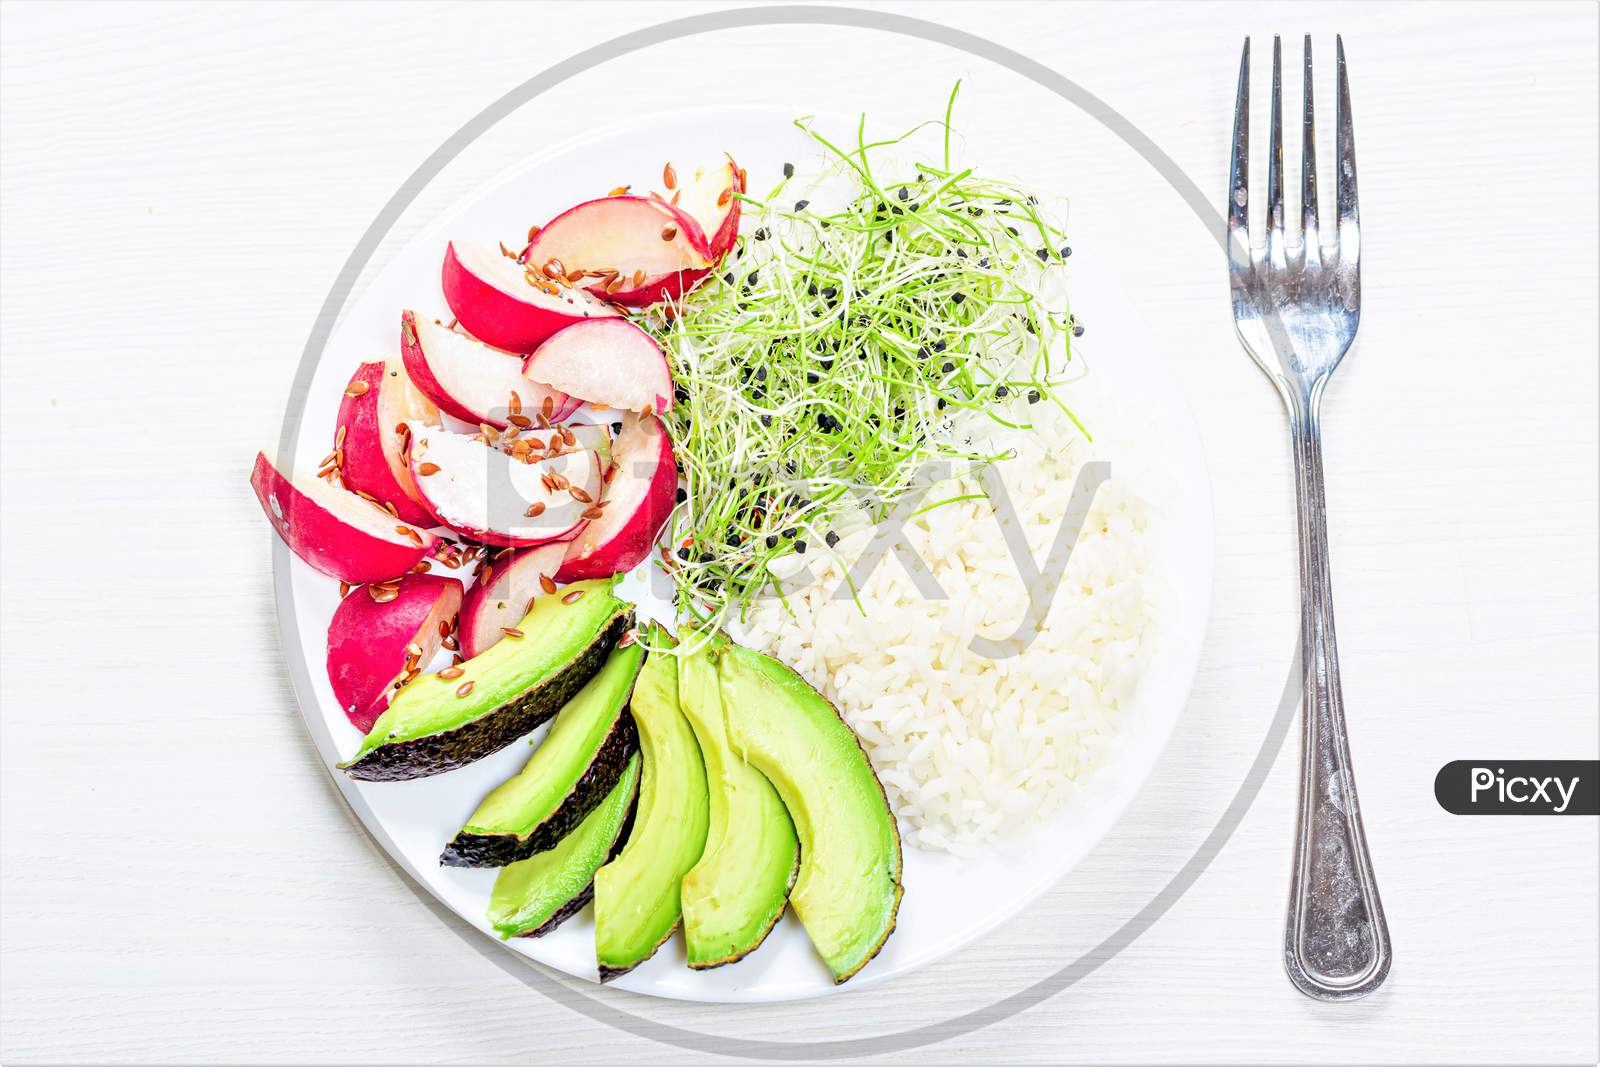 The View From The Top Rice With Slices Of Radish, Avocado And Micro-Greens Onions